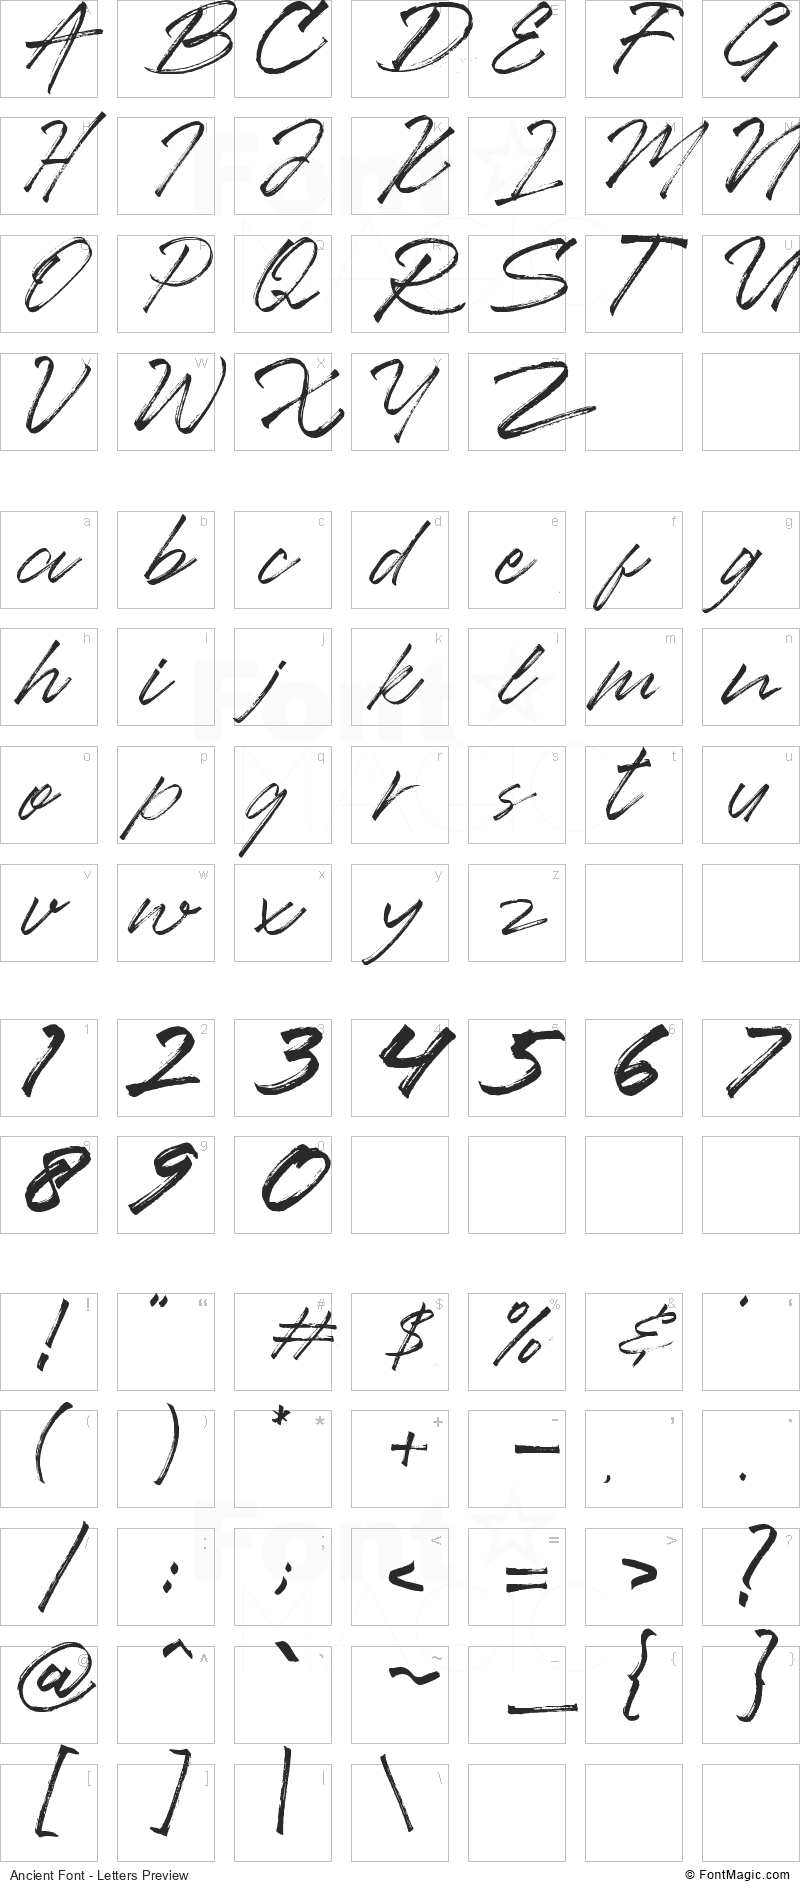 Ancient Font - All Latters Preview Chart